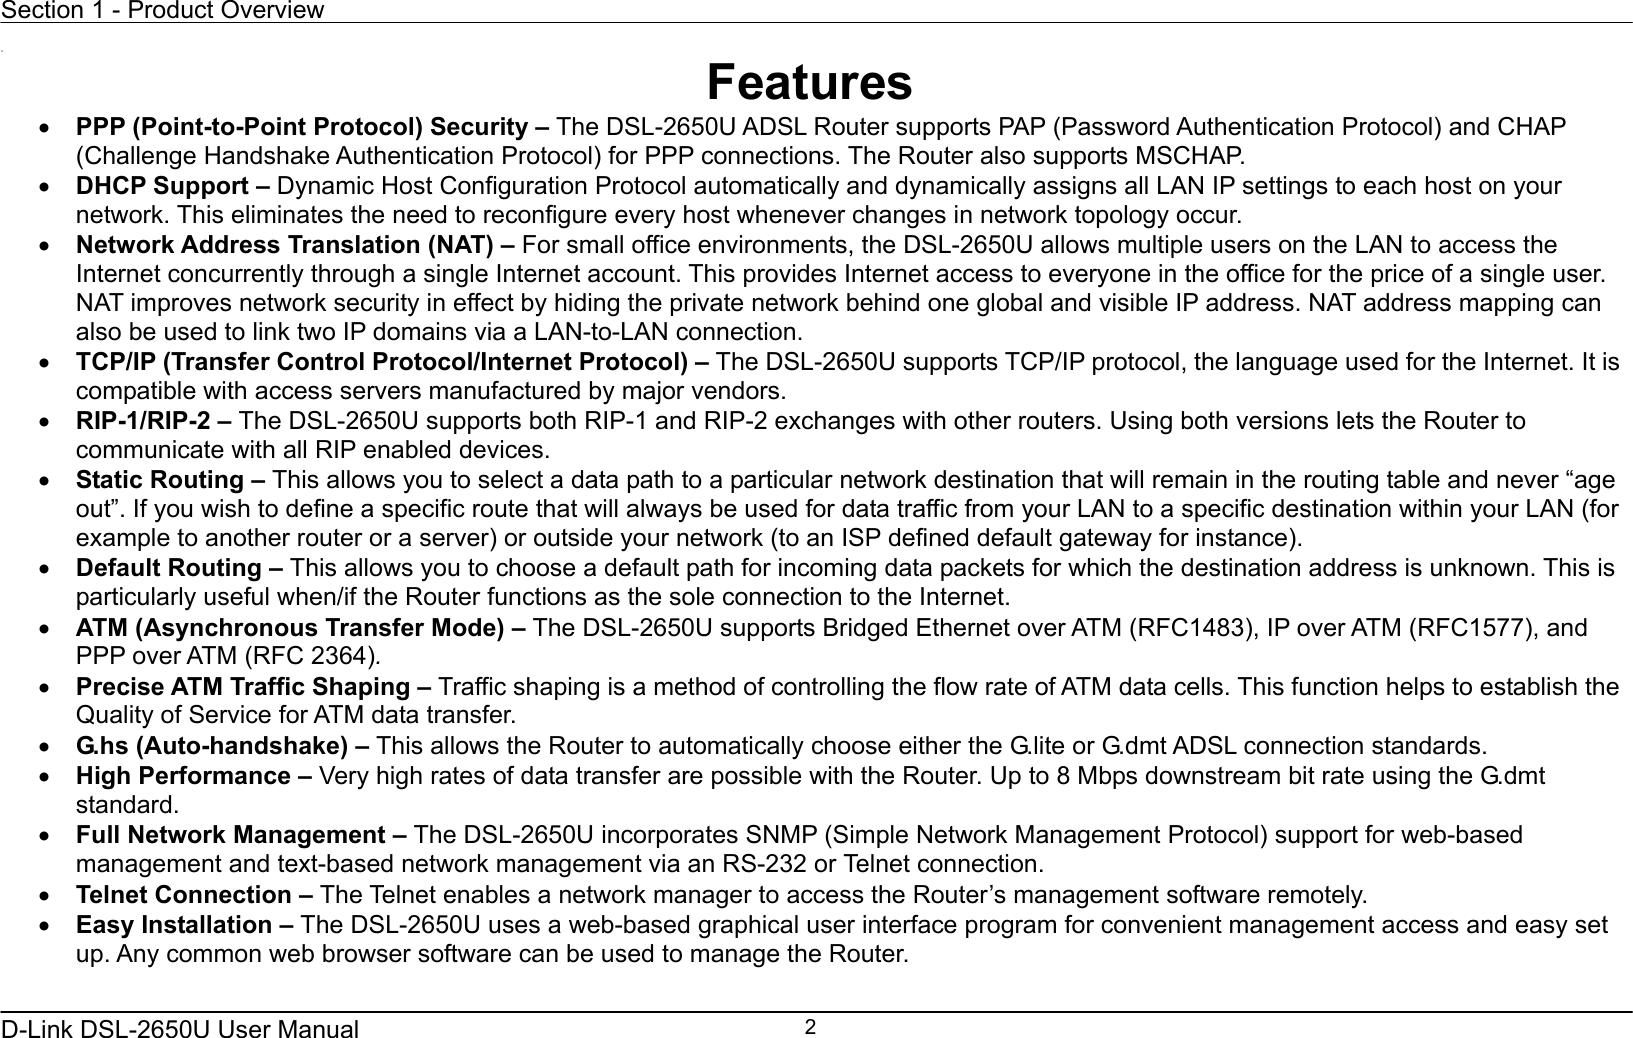 Section 1 - Product Overview  D-Link DSL-2650U User Manual    2 11 Features •  PPP (Point-to-Point Protocol) Security – The DSL-2650U ADSL Router supports PAP (Password Authentication Protocol) and CHAP (Challenge Handshake Authentication Protocol) for PPP connections. The Router also supports MSCHAP. •  DHCP Support – Dynamic Host Configuration Protocol automatically and dynamically assigns all LAN IP settings to each host on your network. This eliminates the need to reconfigure every host whenever changes in network topology occur. •  Network Address Translation (NAT) – For small office environments, the DSL-2650U allows multiple users on the LAN to access the Internet concurrently through a single Internet account. This provides Internet access to everyone in the office for the price of a single user. NAT improves network security in effect by hiding the private network behind one global and visible IP address. NAT address mapping can also be used to link two IP domains via a LAN-to-LAN connection. •  TCP/IP (Transfer Control Protocol/Internet Protocol) – The DSL-2650U supports TCP/IP protocol, the language used for the Internet. It is compatible with access servers manufactured by major vendors. •  RIP-1/RIP-2 – The DSL-2650U supports both RIP-1 and RIP-2 exchanges with other routers. Using both versions lets the Router to communicate with all RIP enabled devices. •  Static Routing – This allows you to select a data path to a particular network destination that will remain in the routing table and never “age out”. If you wish to define a specific route that will always be used for data traffic from your LAN to a specific destination within your LAN (for example to another router or a server) or outside your network (to an ISP defined default gateway for instance).     •  Default Routing – This allows you to choose a default path for incoming data packets for which the destination address is unknown. This is particularly useful when/if the Router functions as the sole connection to the Internet. •  ATM (Asynchronous Transfer Mode) – The DSL-2650U supports Bridged Ethernet over ATM (RFC1483), IP over ATM (RFC1577), and PPP over ATM (RFC 2364).   •  Precise ATM Traffic Shaping – Traffic shaping is a method of controlling the flow rate of ATM data cells. This function helps to establish the Quality of Service for ATM data transfer. •  G.hs (Auto-handshake) – This allows the Router to automatically choose either the G.lite or G.dmt ADSL connection standards.   •  High Performance – Very high rates of data transfer are possible with the Router. Up to 8 Mbps downstream bit rate using the G.dmt standard. •  Full Network Management – The DSL-2650U incorporates SNMP (Simple Network Management Protocol) support for web-based management and text-based network management via an RS-232 or Telnet connection. •  Telnet Connection – The Telnet enables a network manager to access the Router’s management software remotely. •  Easy Installation – The DSL-2650U uses a web-based graphical user interface program for convenient management access and easy set up. Any common web browser software can be used to manage the Router. 